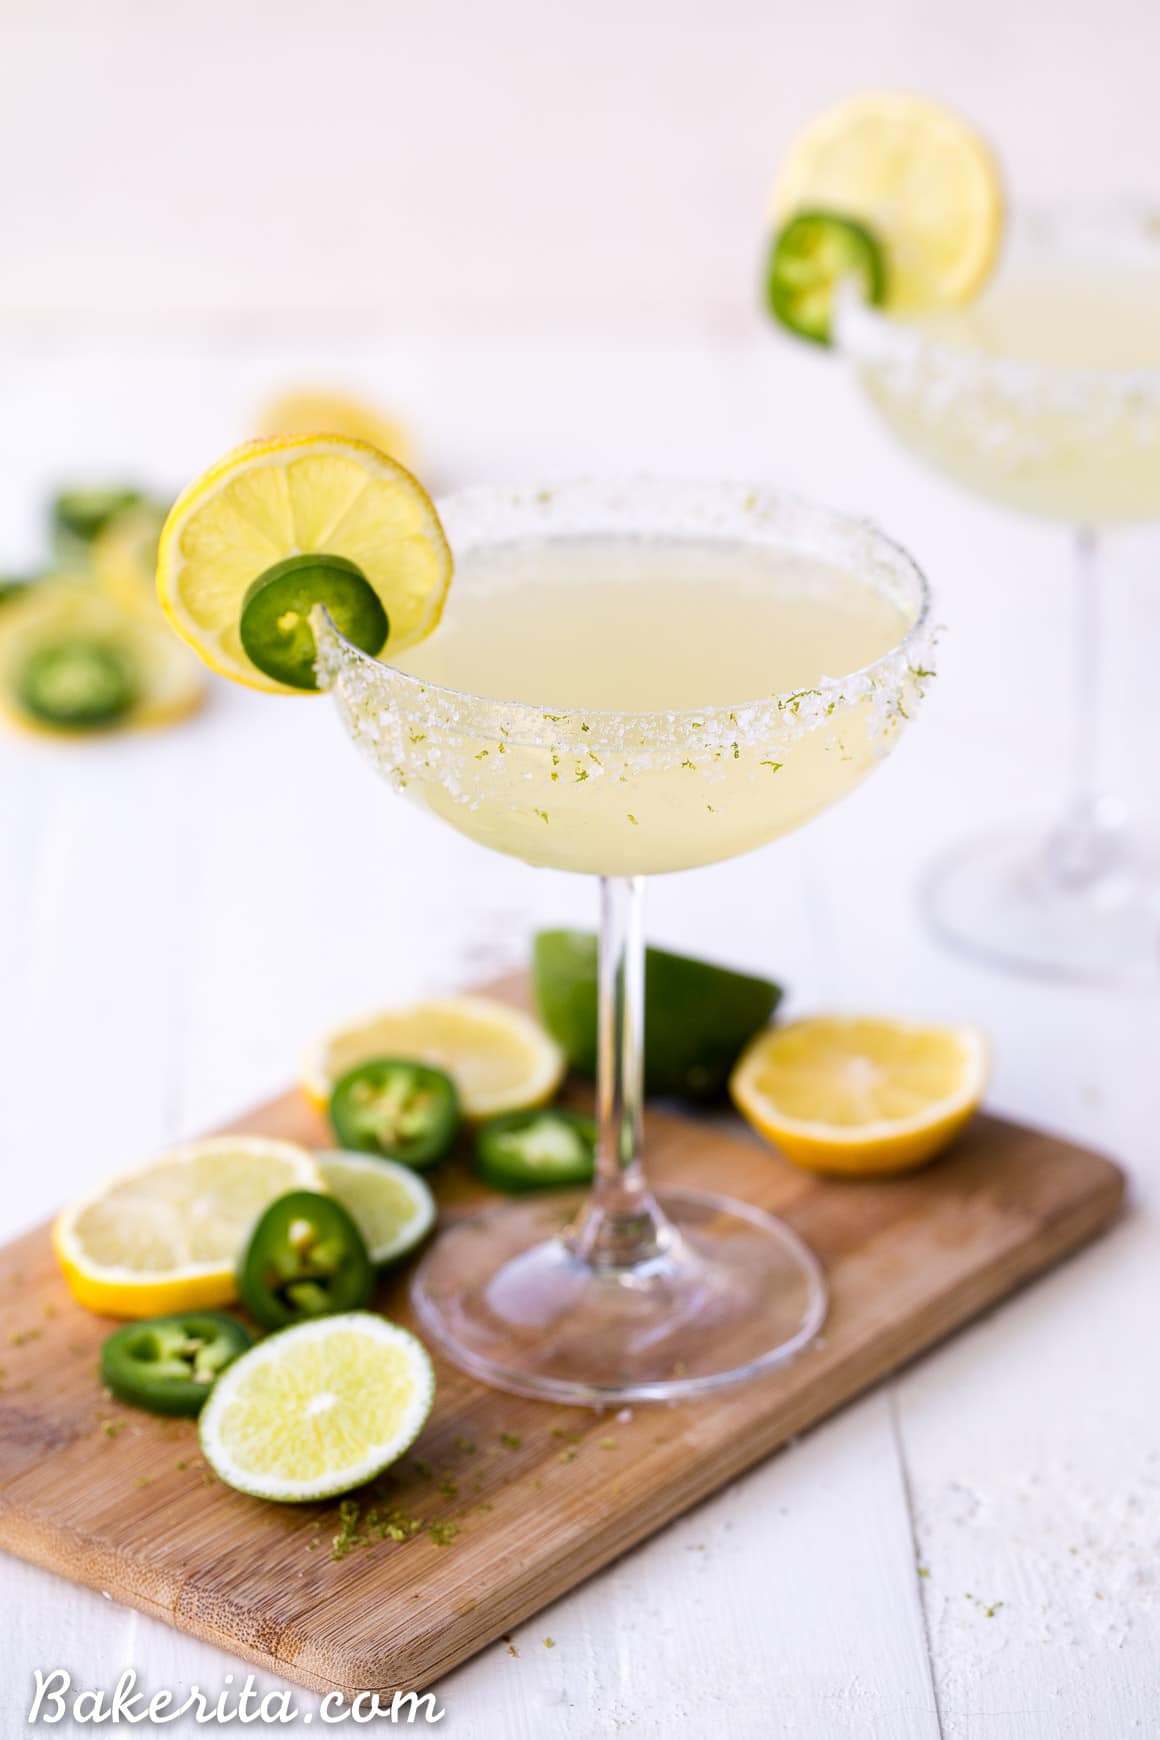 This Pacific Rim Margarita is a refreshing, tropical drink that you'll love sipping on! It's flavored with citrus and has a spicy coconut twist. Enjoy responsibly!